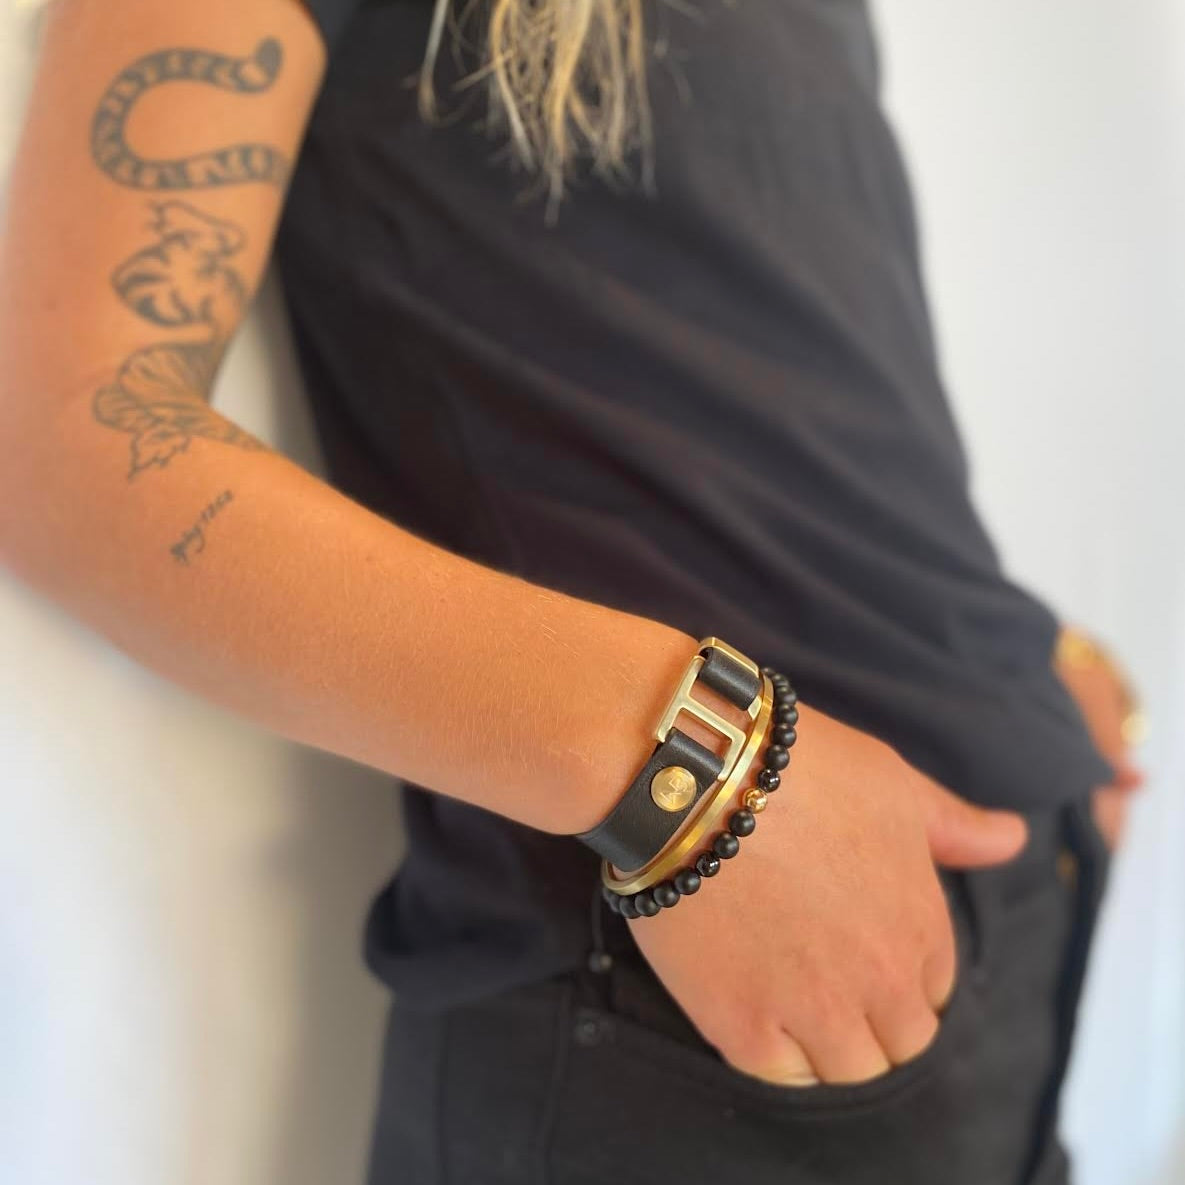 Our striking black Italian leather cuff bracelet is paired perfectly with our artisan designed hardware. Choice includes rose gold, yellow gold, stainless steel or black ceramic. This adjustable size bracelet is a distinctive piece worn alone or with a WristBend stacking bracelet. Made by WristBend